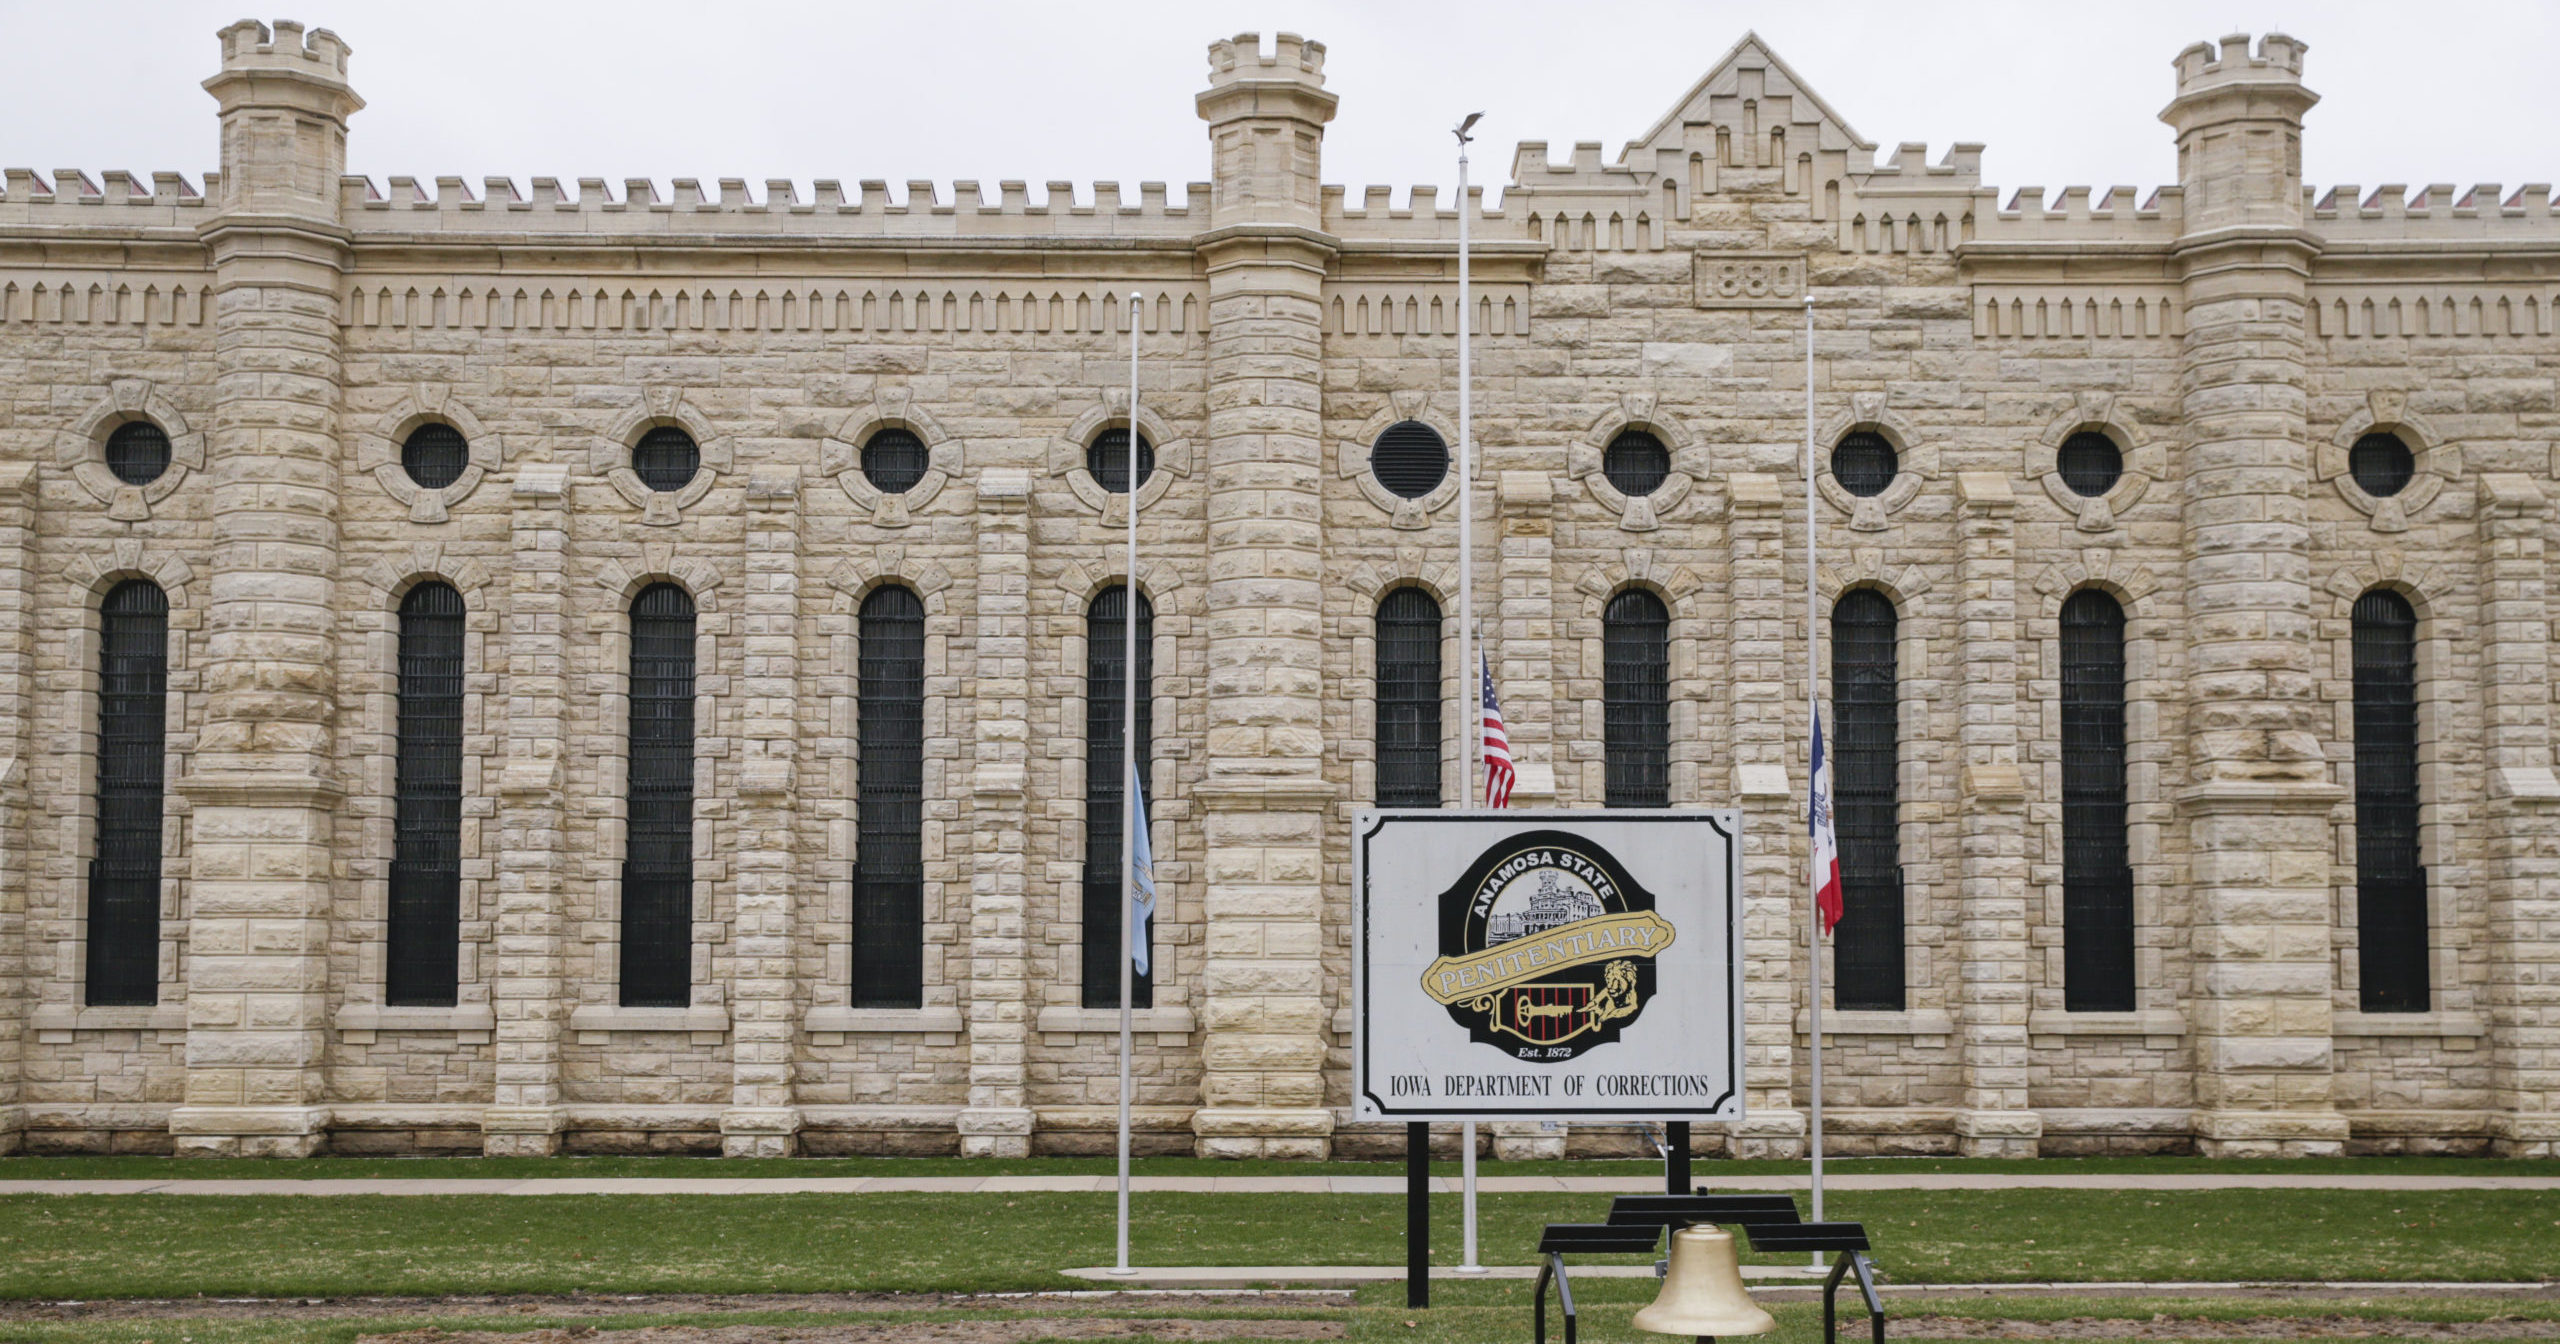 Flags are flown at half staff in memory of the two prison workers killed in an escape attempt at the Anamosa State Penitentiary in Anamosa, Iowa, on March 24, 2021.